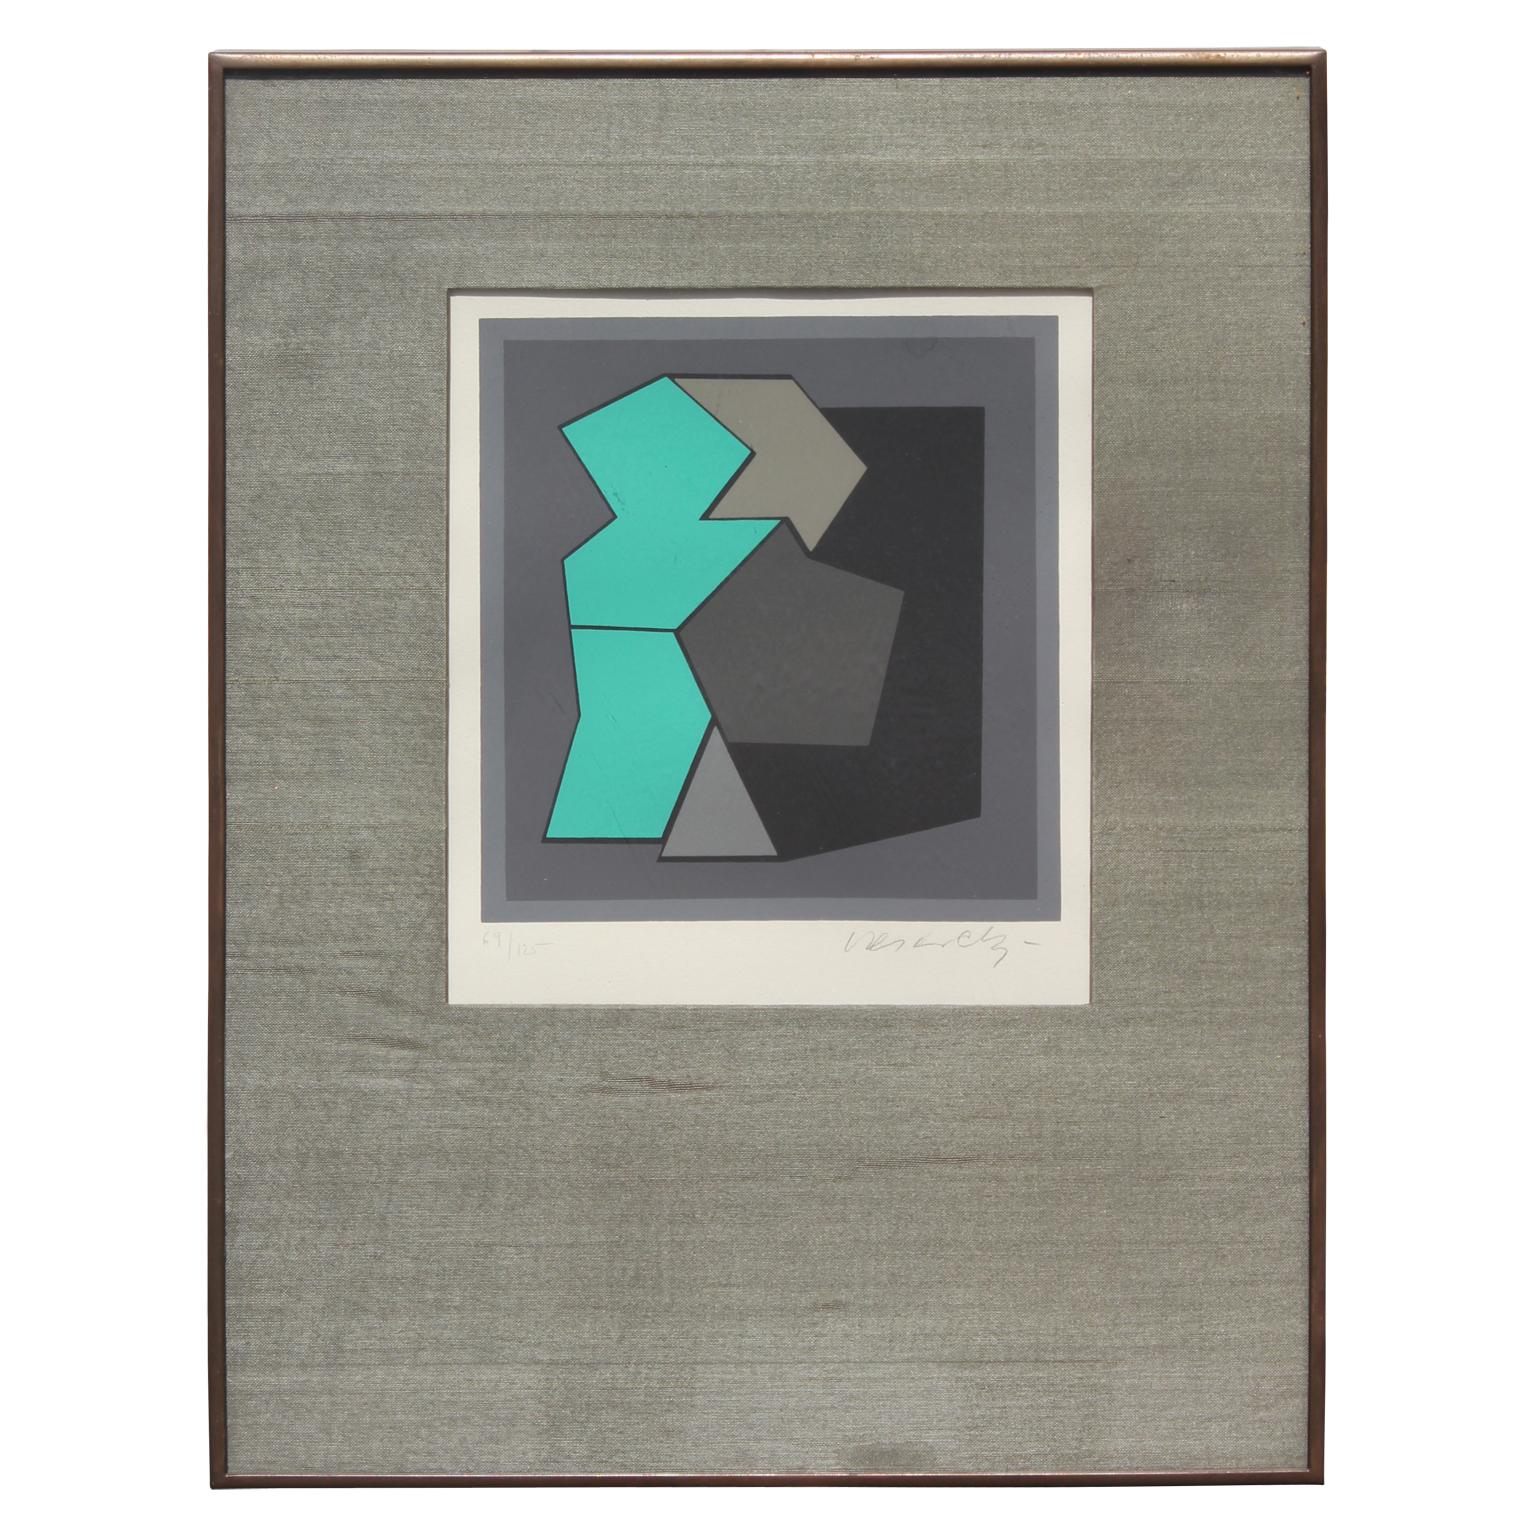 Victor Vasarely Abstract Print - "Quamie" Teal Geometric Abstract Lithograph